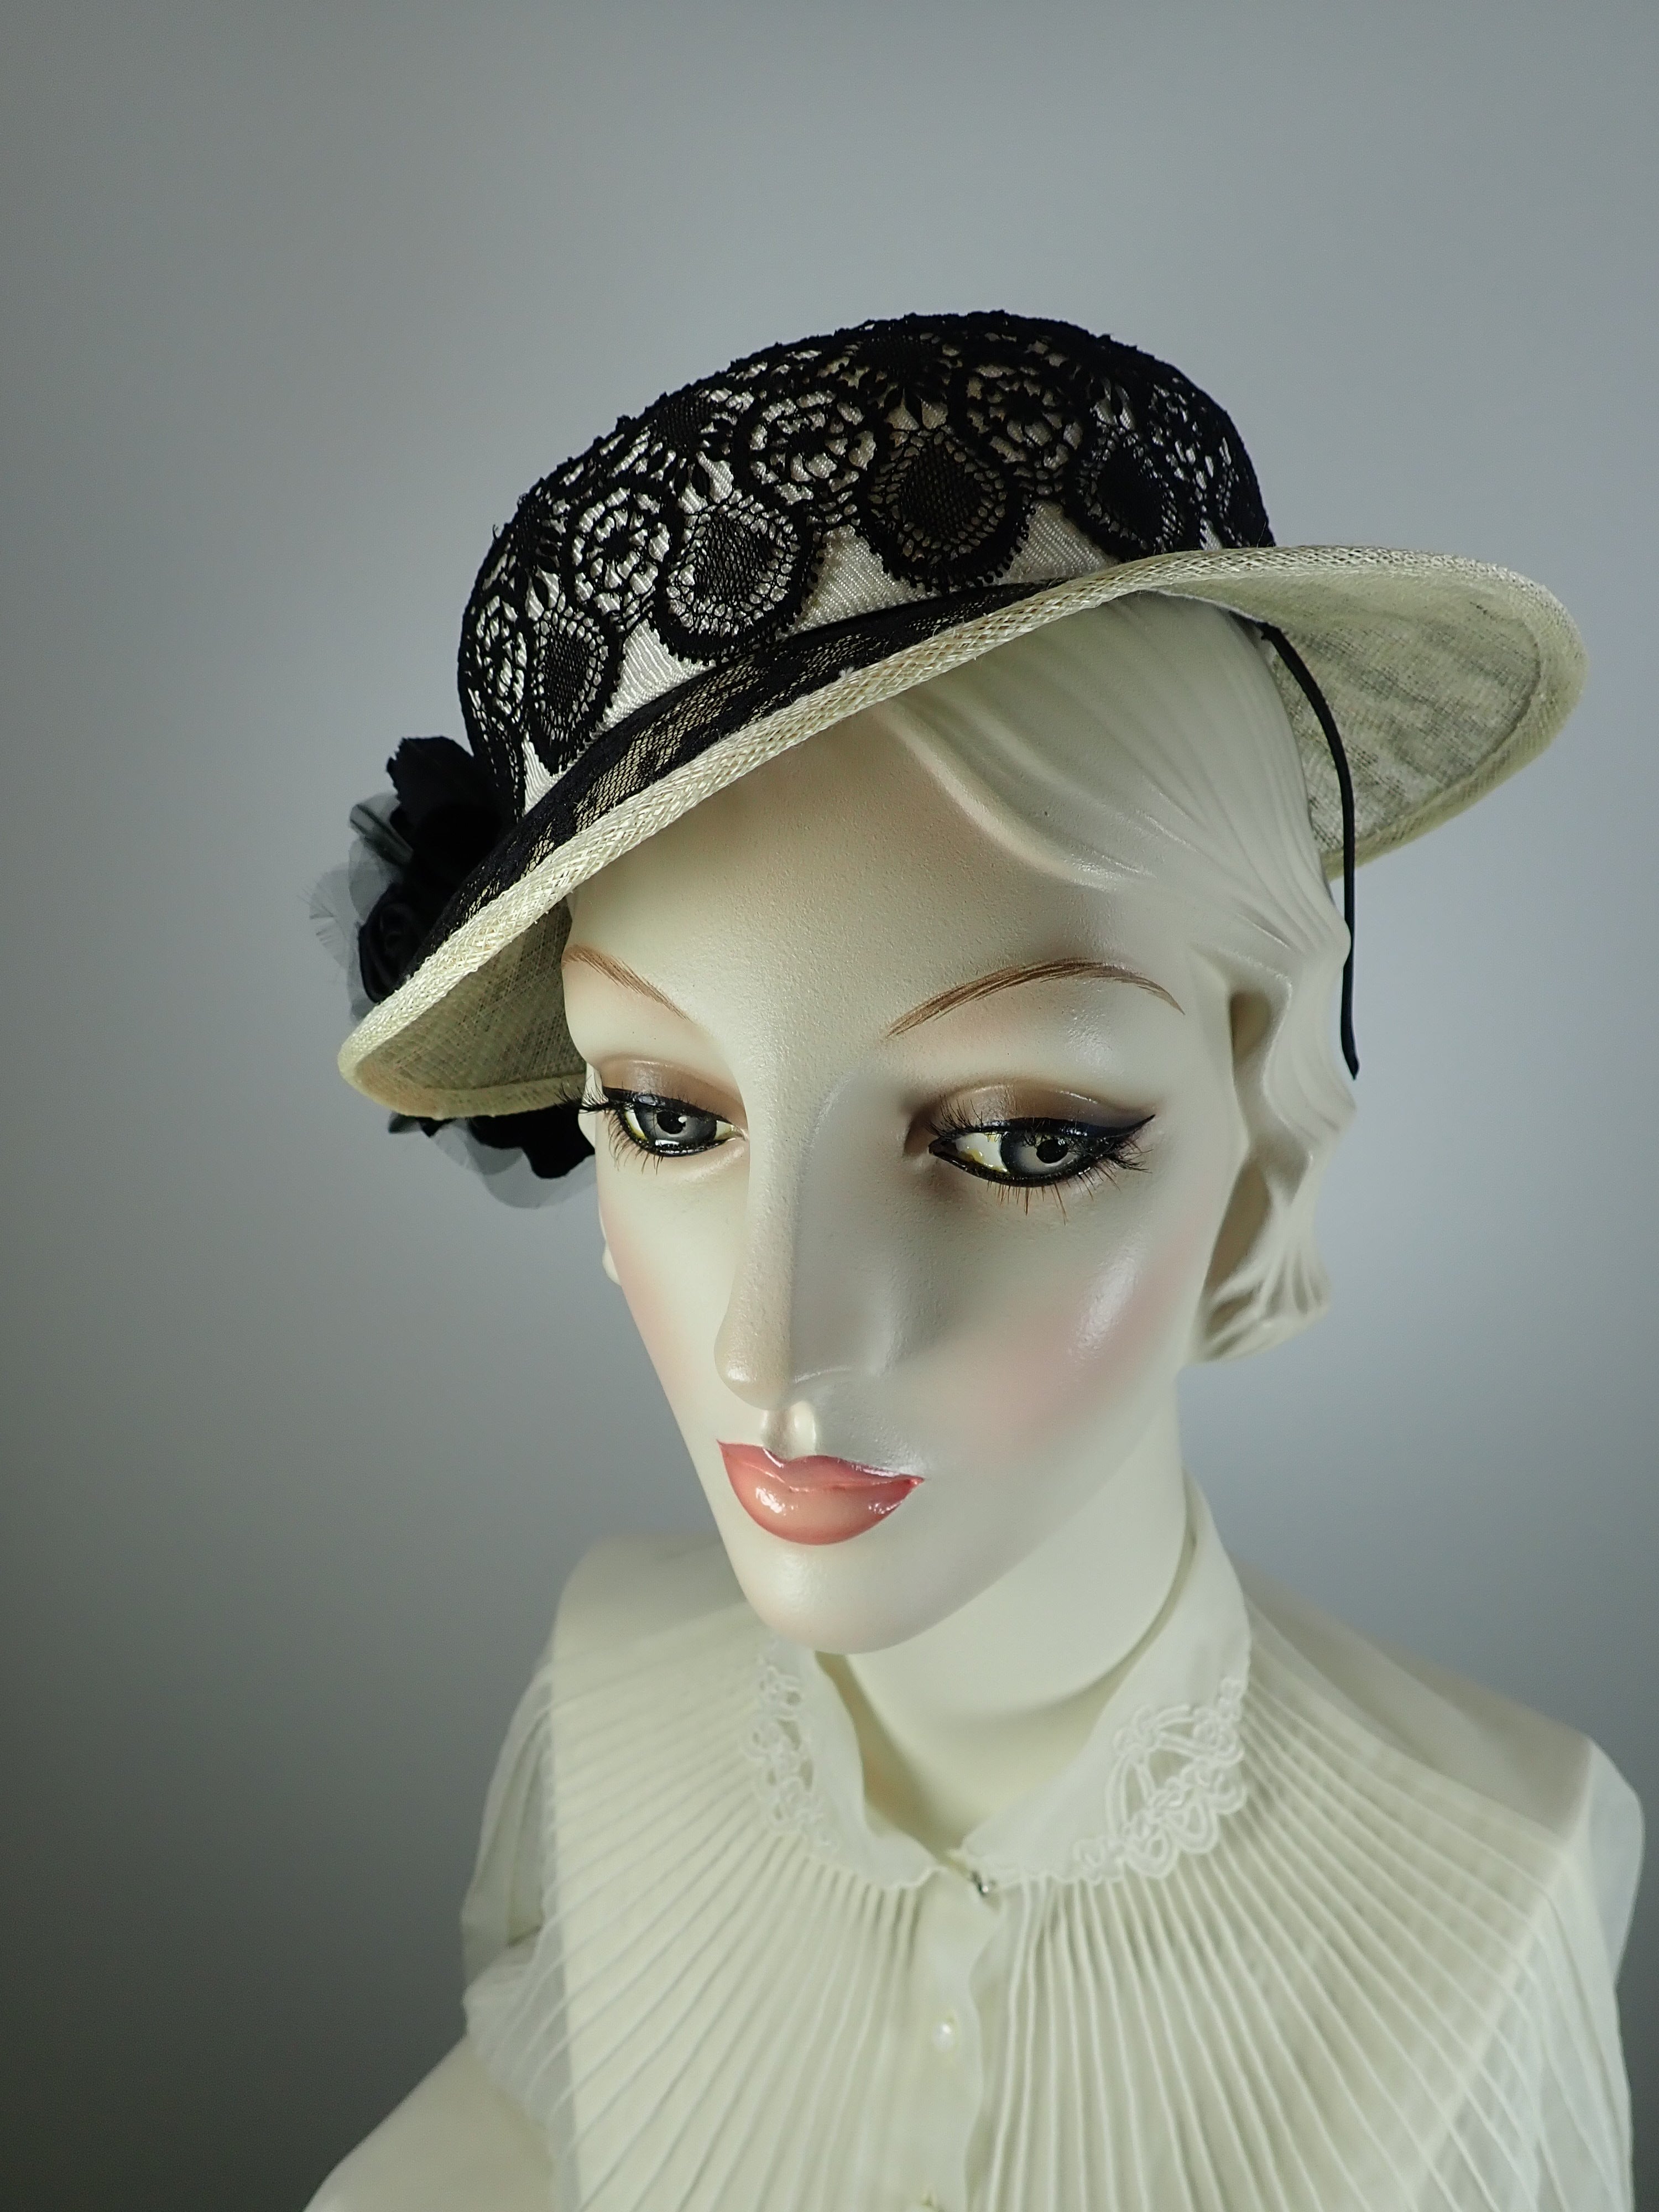 Womens Derby Hat, Black white Hat, Black lace sinamay Straw hat, Summe –  What a Great Hat